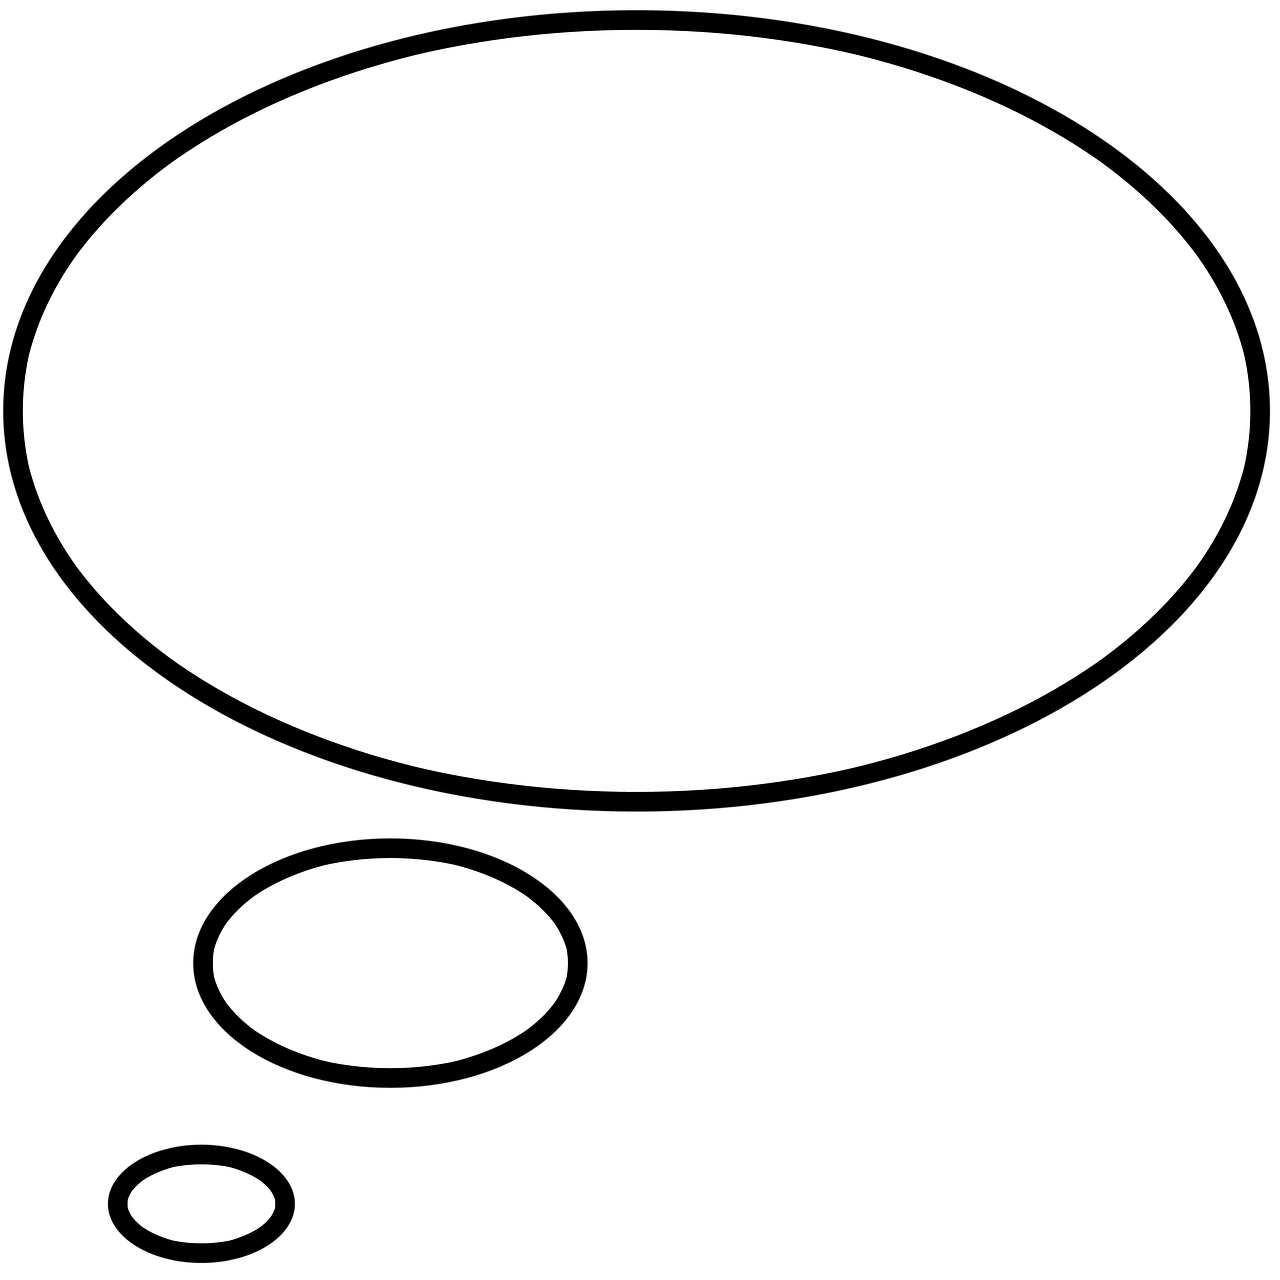 a black and white image of a thought bubble, a screenshot, by Andrei Kolkoutine, deviantart, minimalism, black backround. inkscape, white background!!!!!!!!!!, large vertical blank spaces, lying